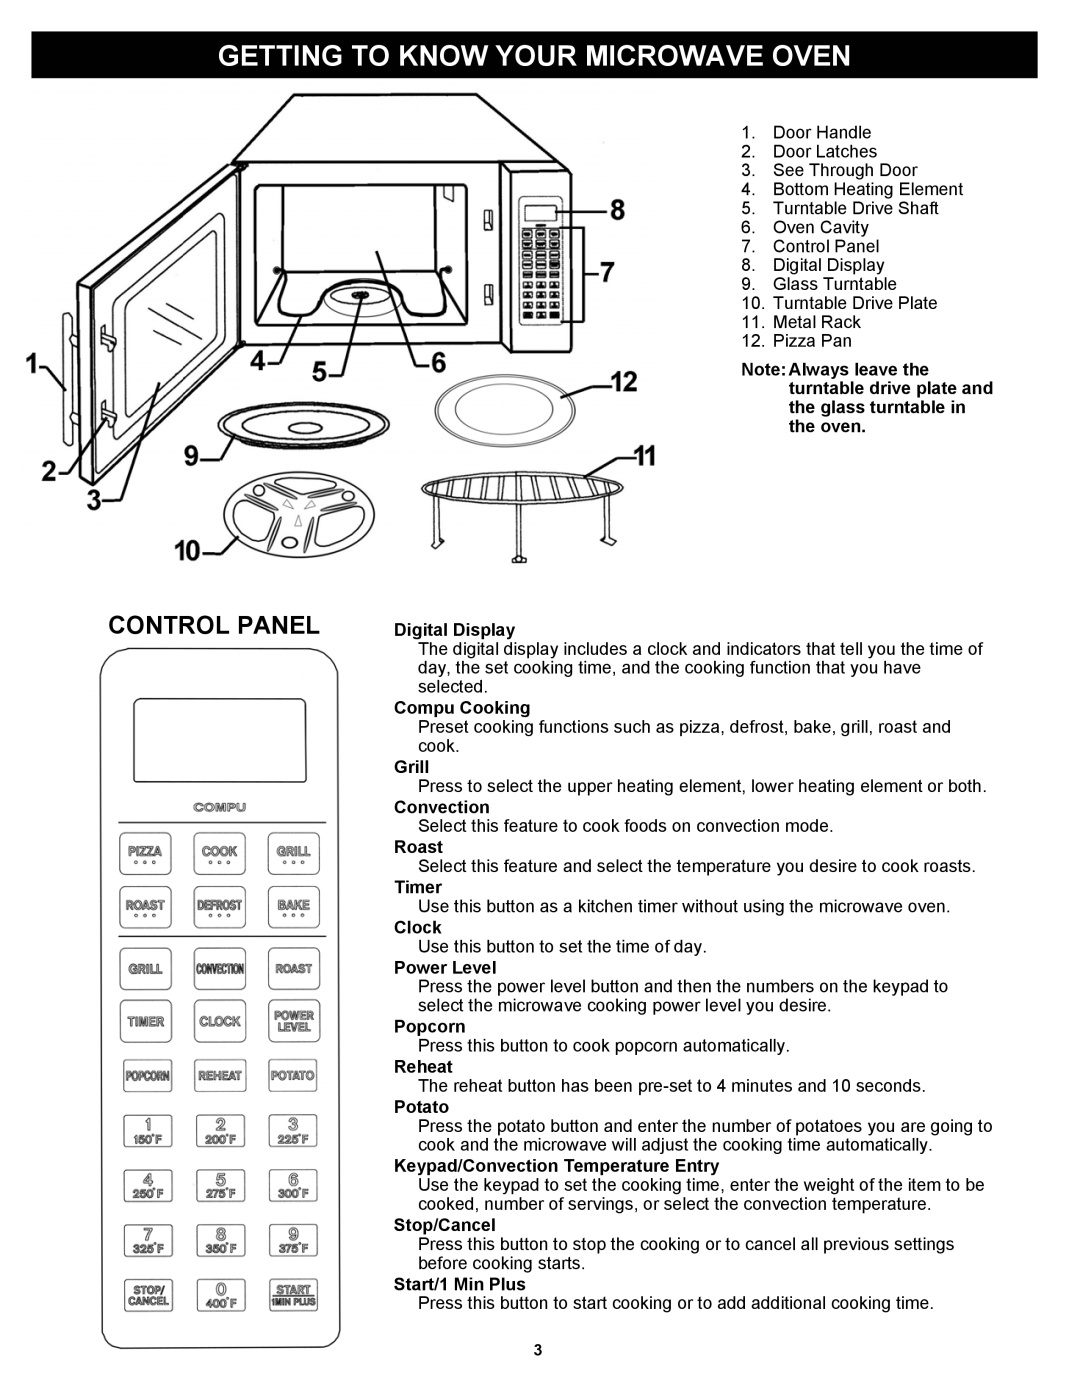 Euro-Pro K5345 owner manual Getting To Know Your Microwave Oven, Control Panel 